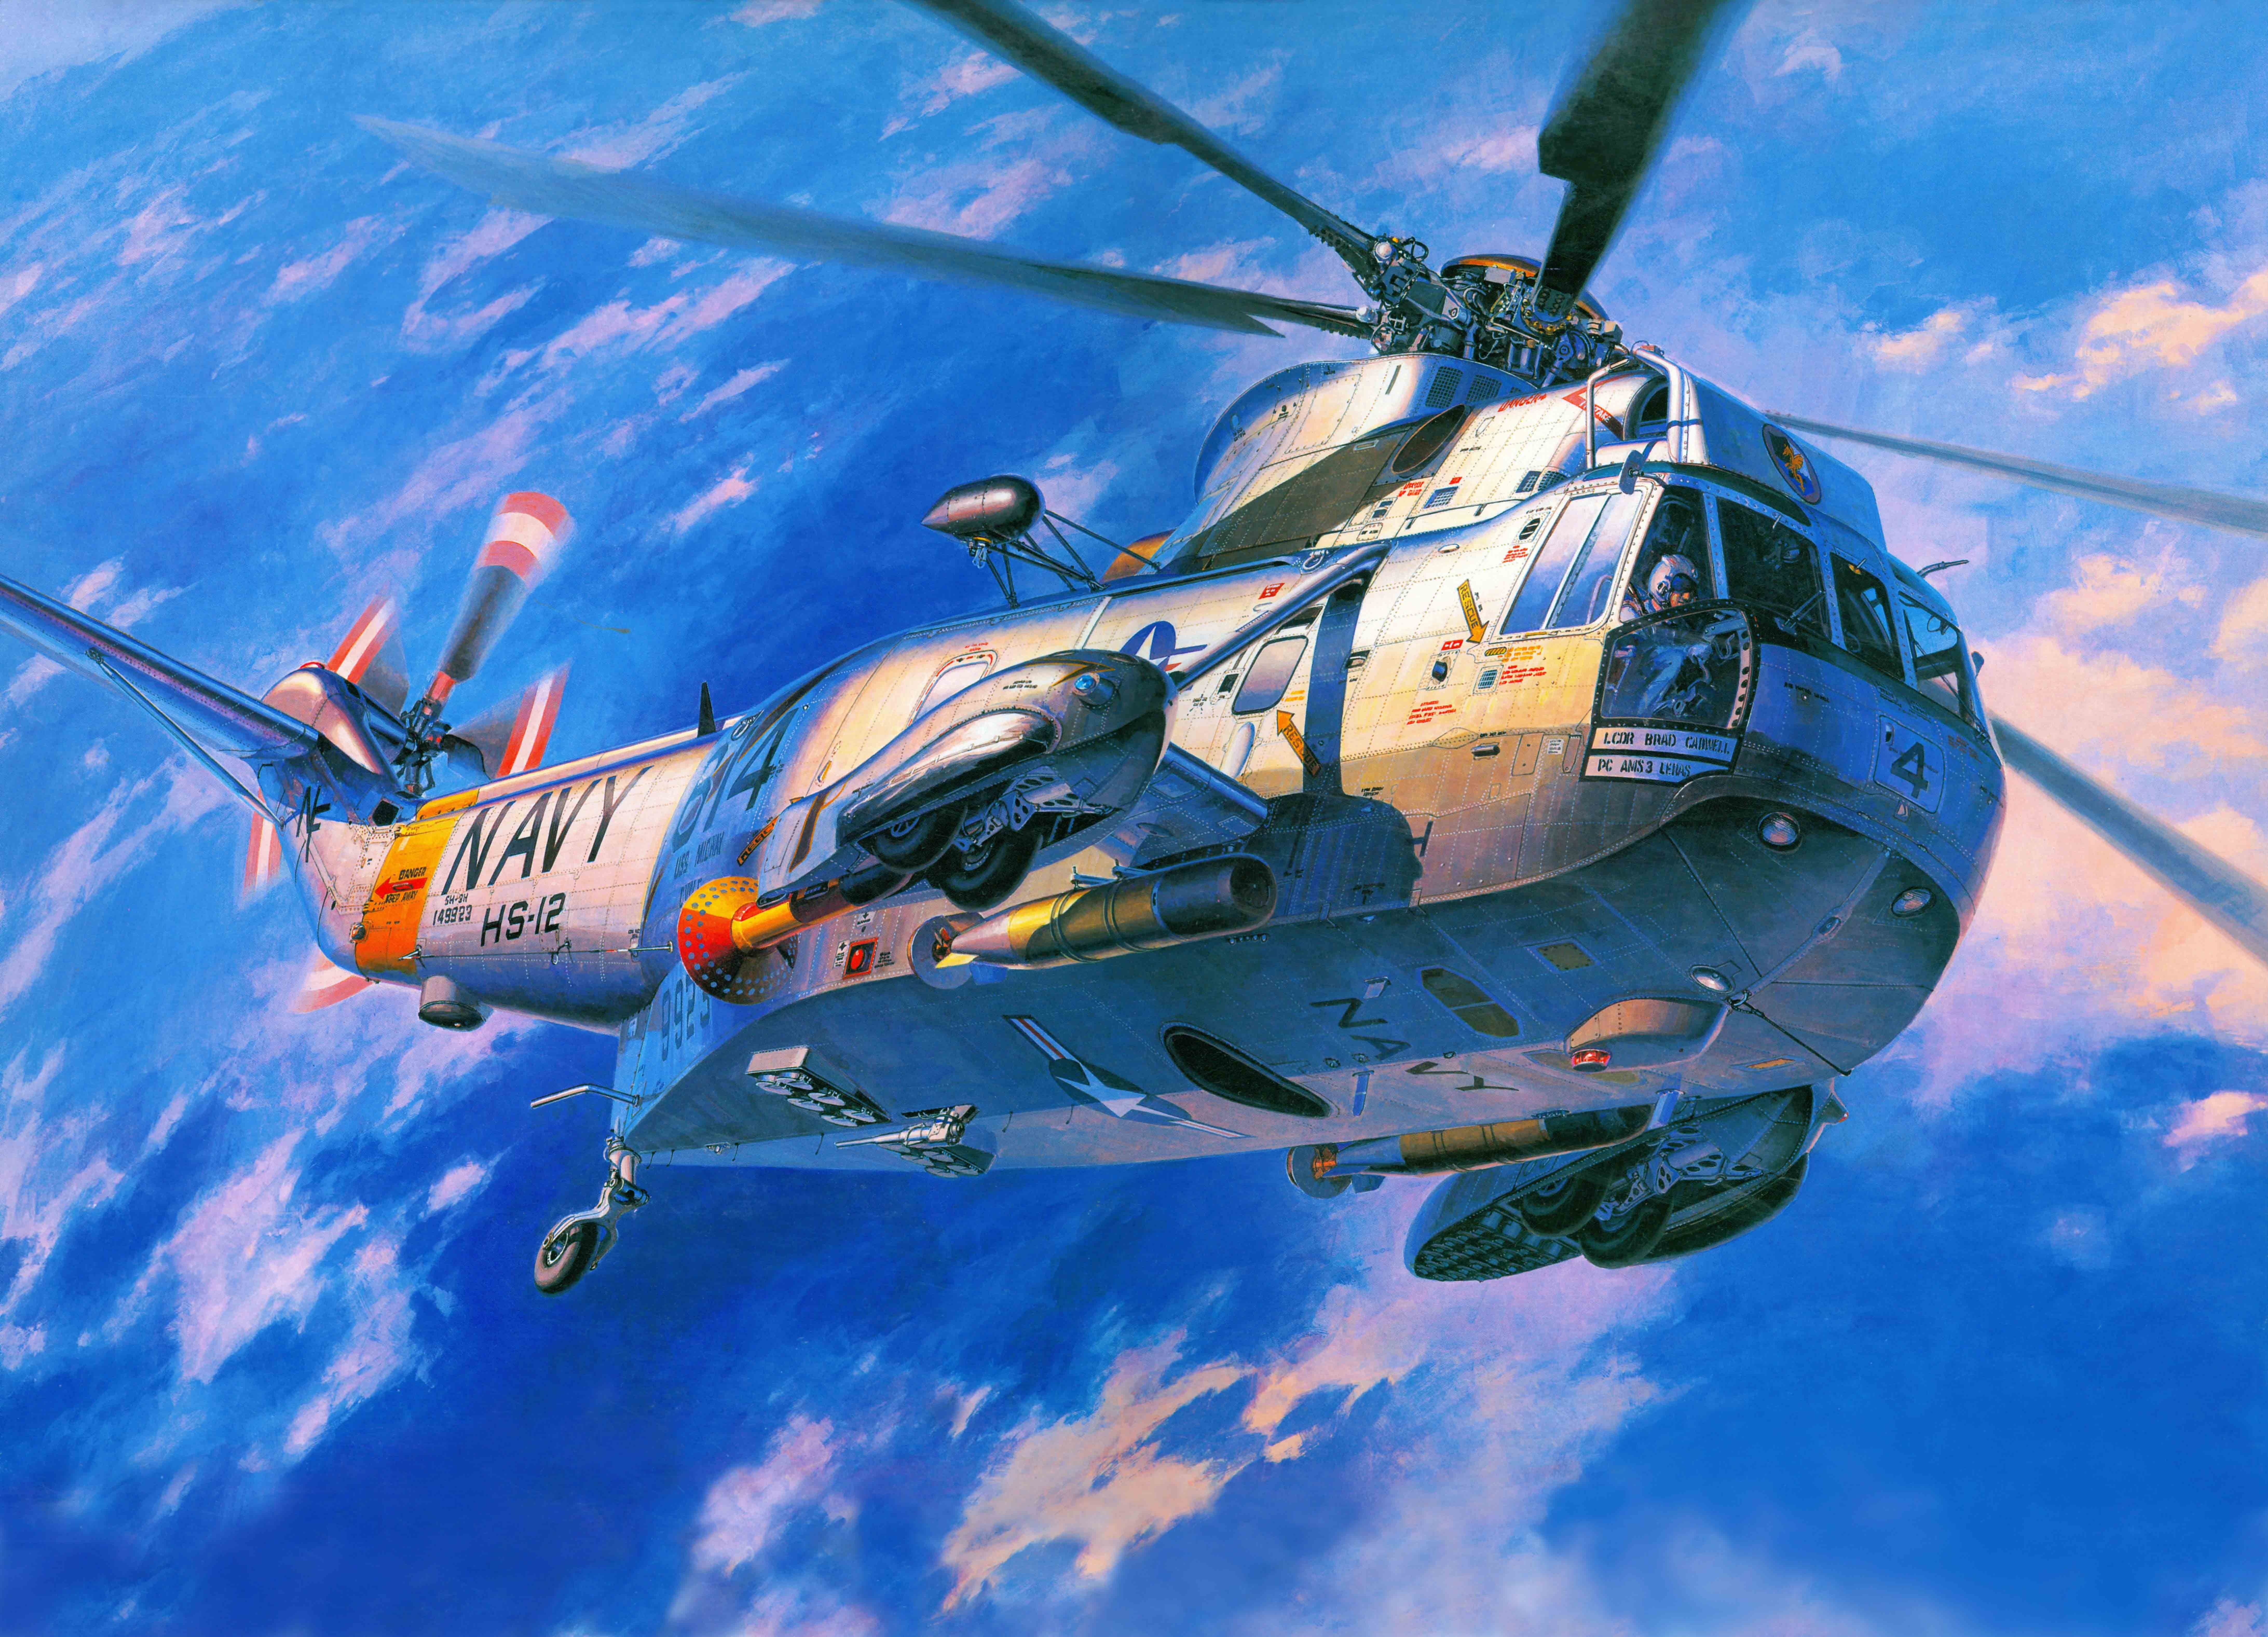 art, helicopter, Sikorsky, Navy, Sea, transport, anti-submarine